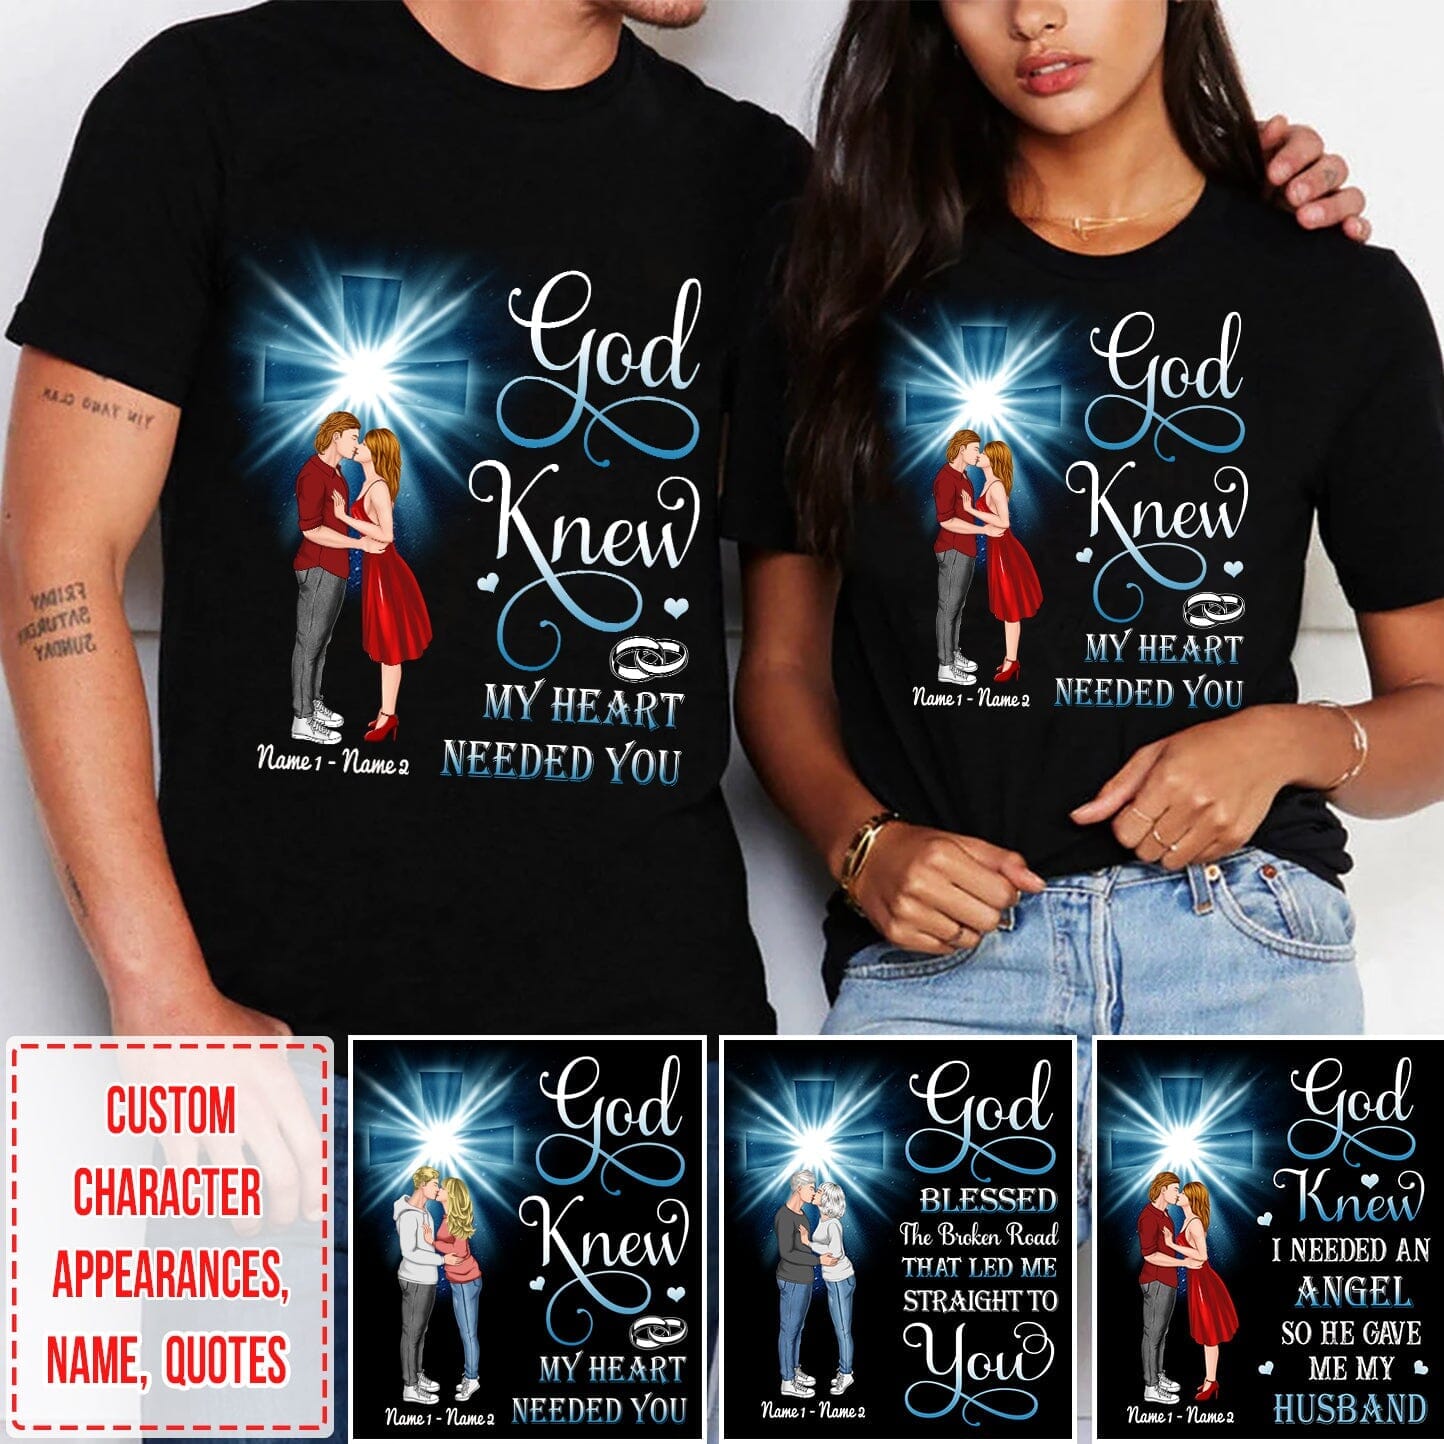 God Knew My Heart needed you Christian Cross Kissing Couple Personalized Valentine's Day Gift Black T-shirt and Hoodie HTN29DEC22CT1 Black T-shirt and Hoodie Humancustom - Unique Personalized Gifts Classic Tee Black S